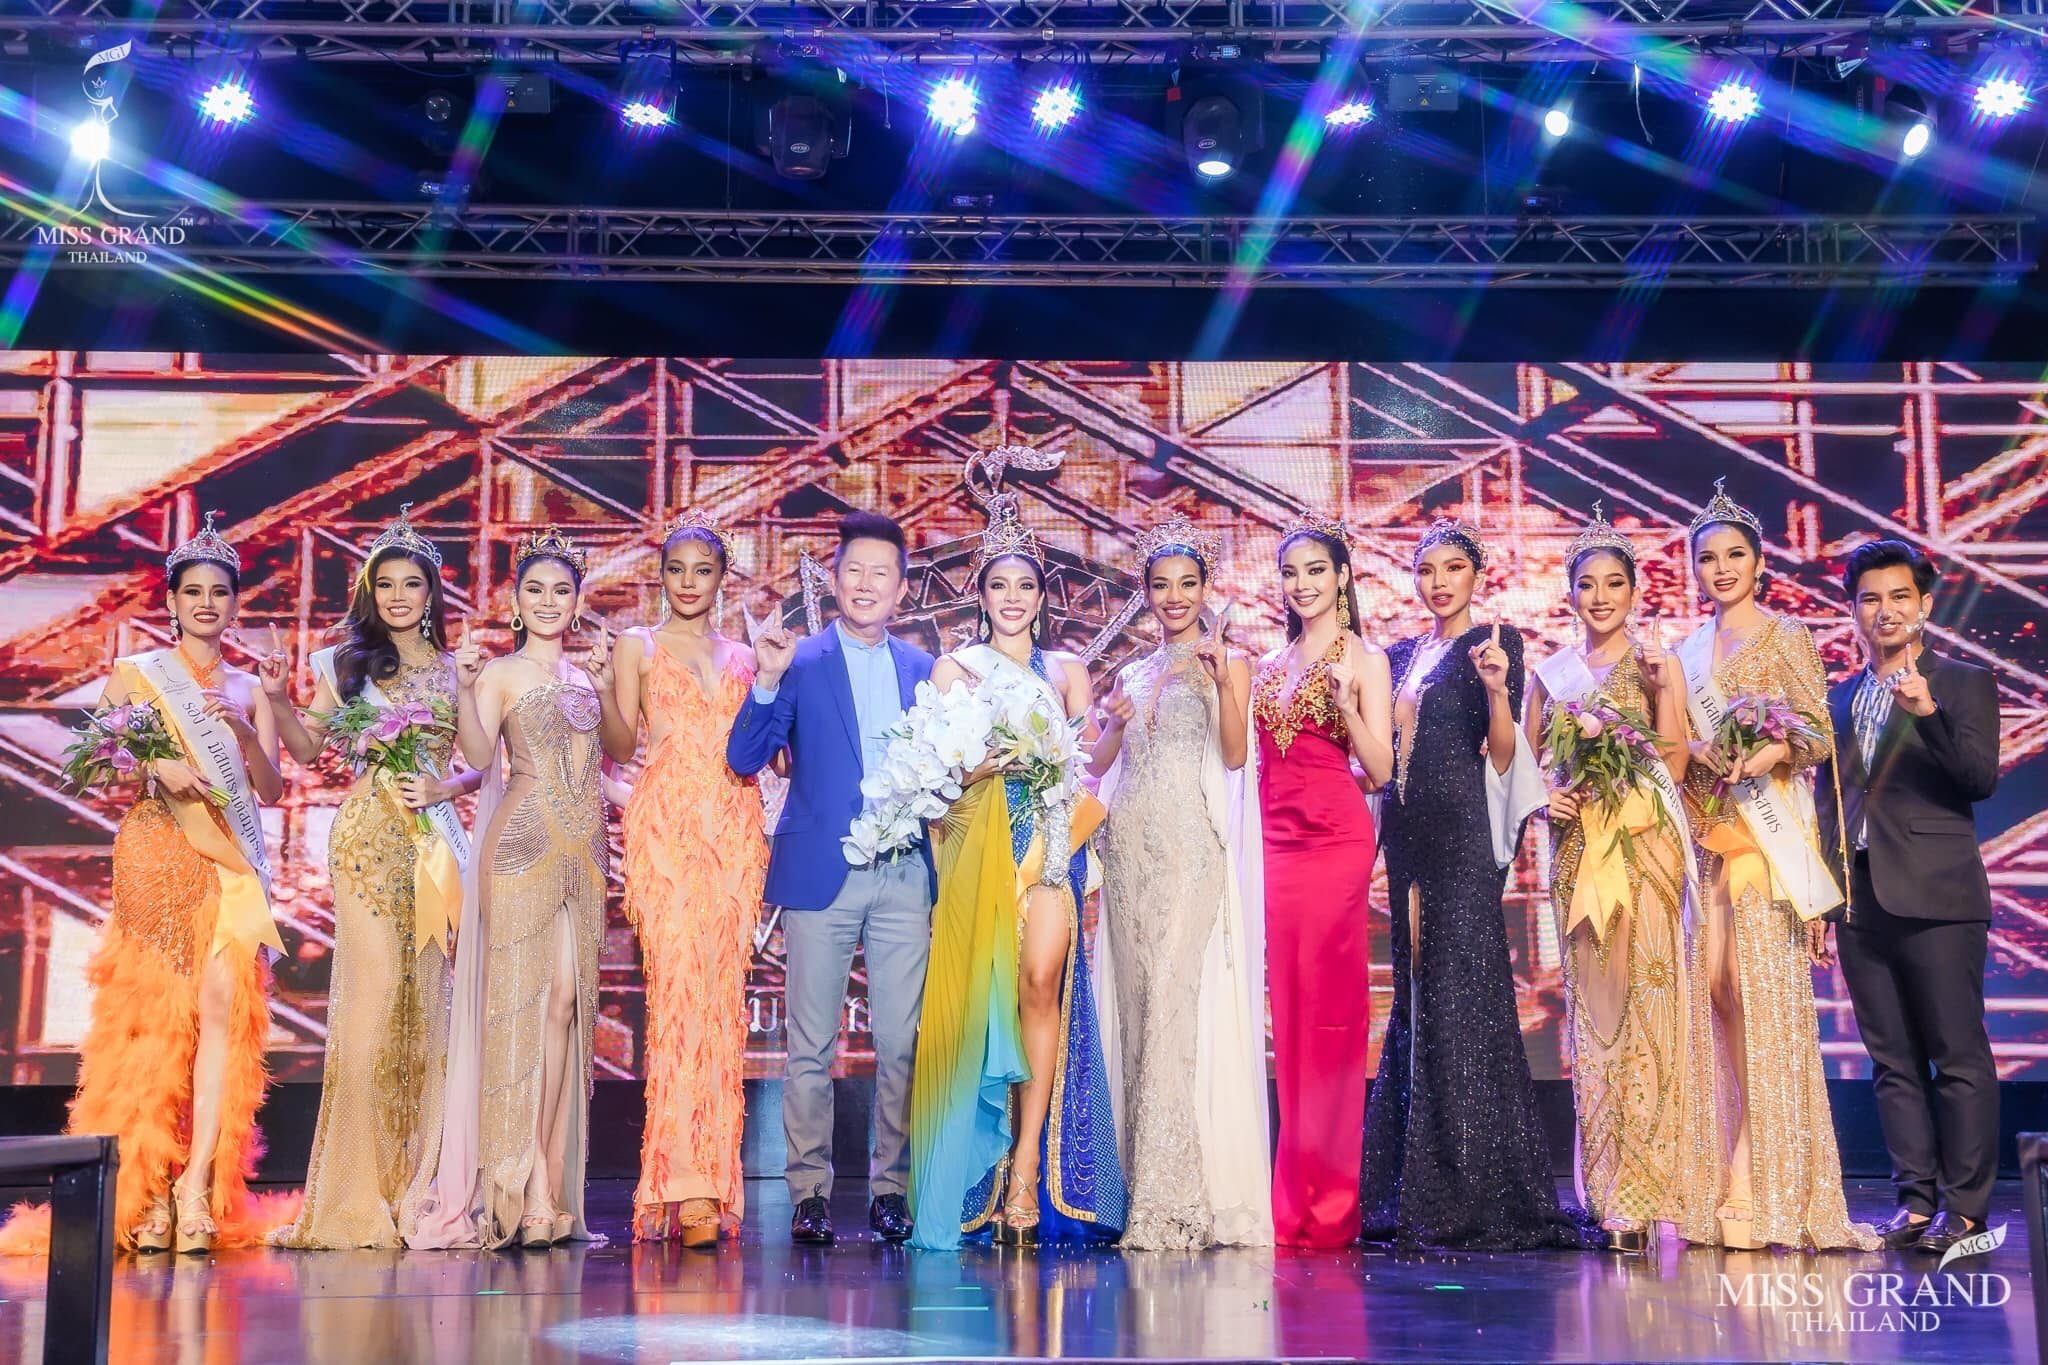 Thai beauty pageant faces probe after candidates test positive for COVID-19